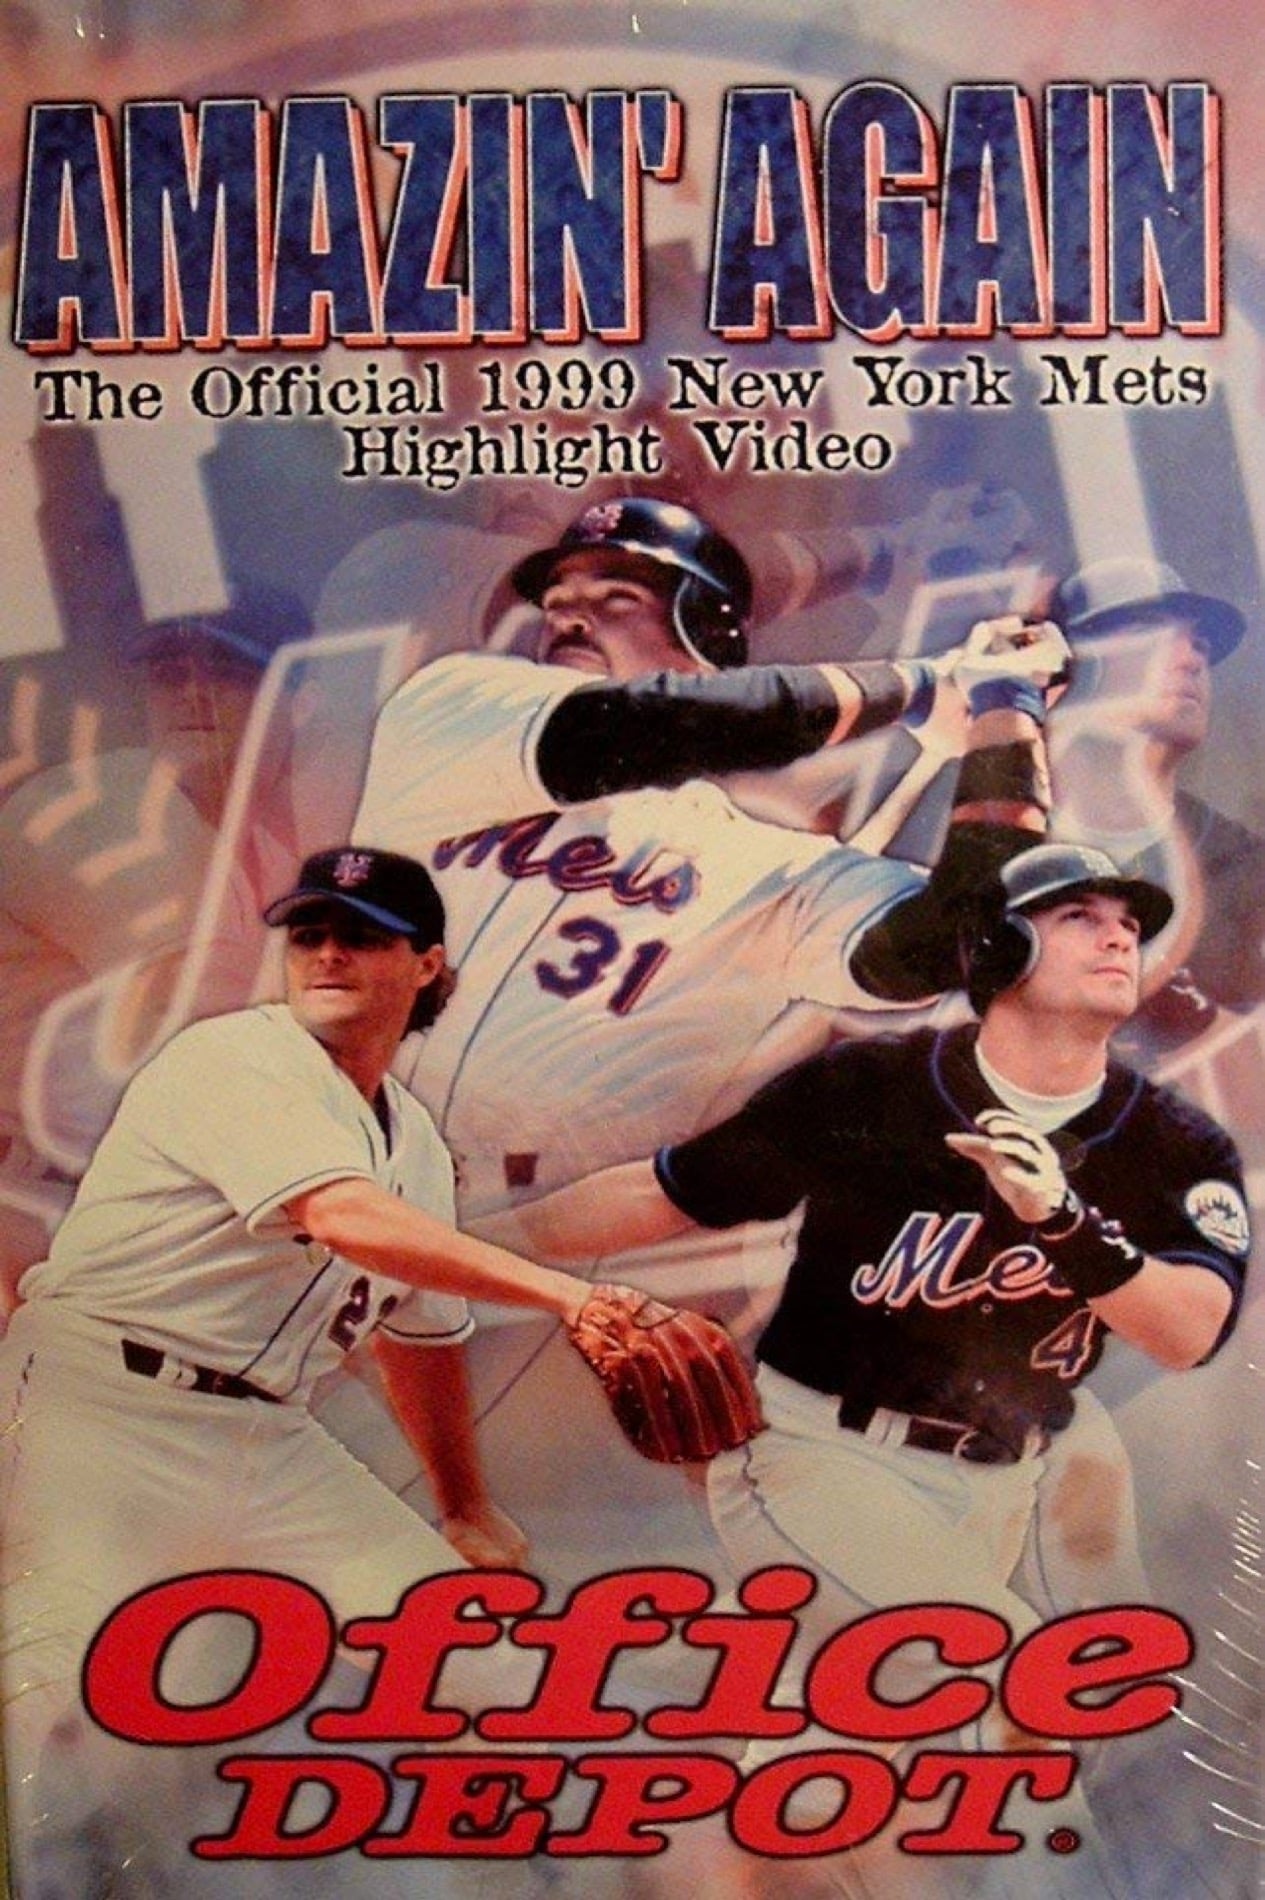 Amazin' Again: The Official 1999 New York Mets Highlight Video